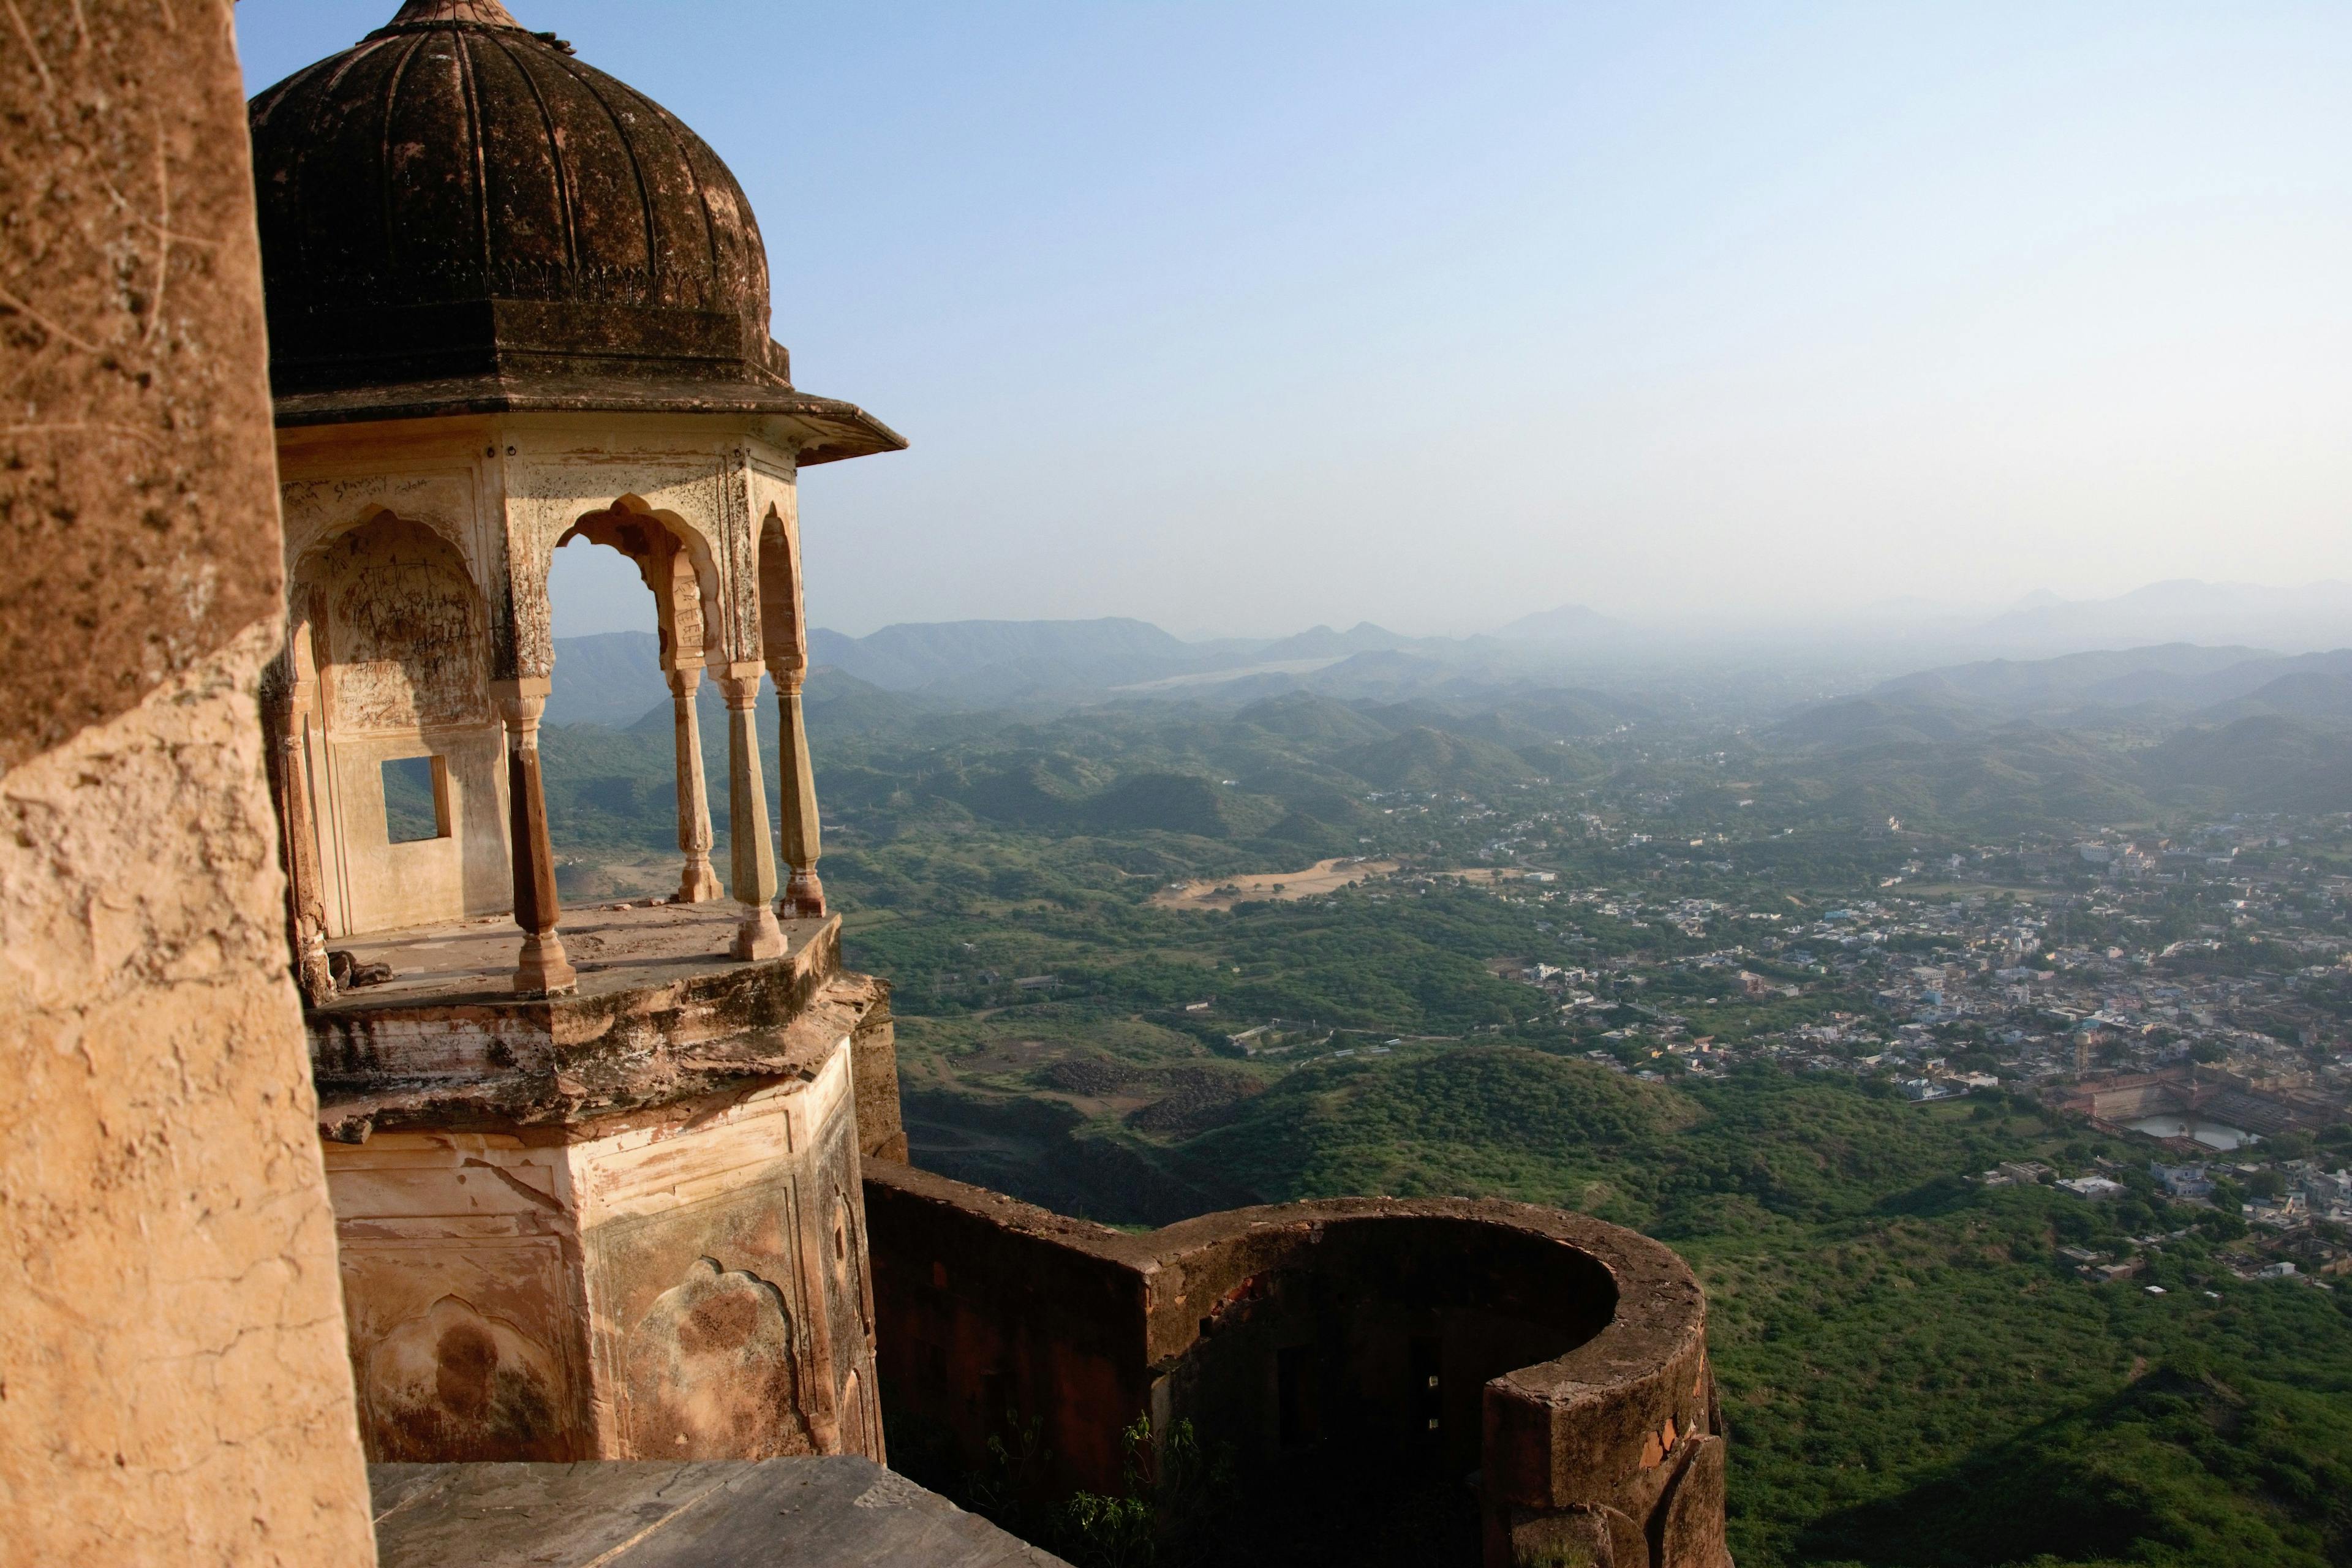 View of Khetri from the fort